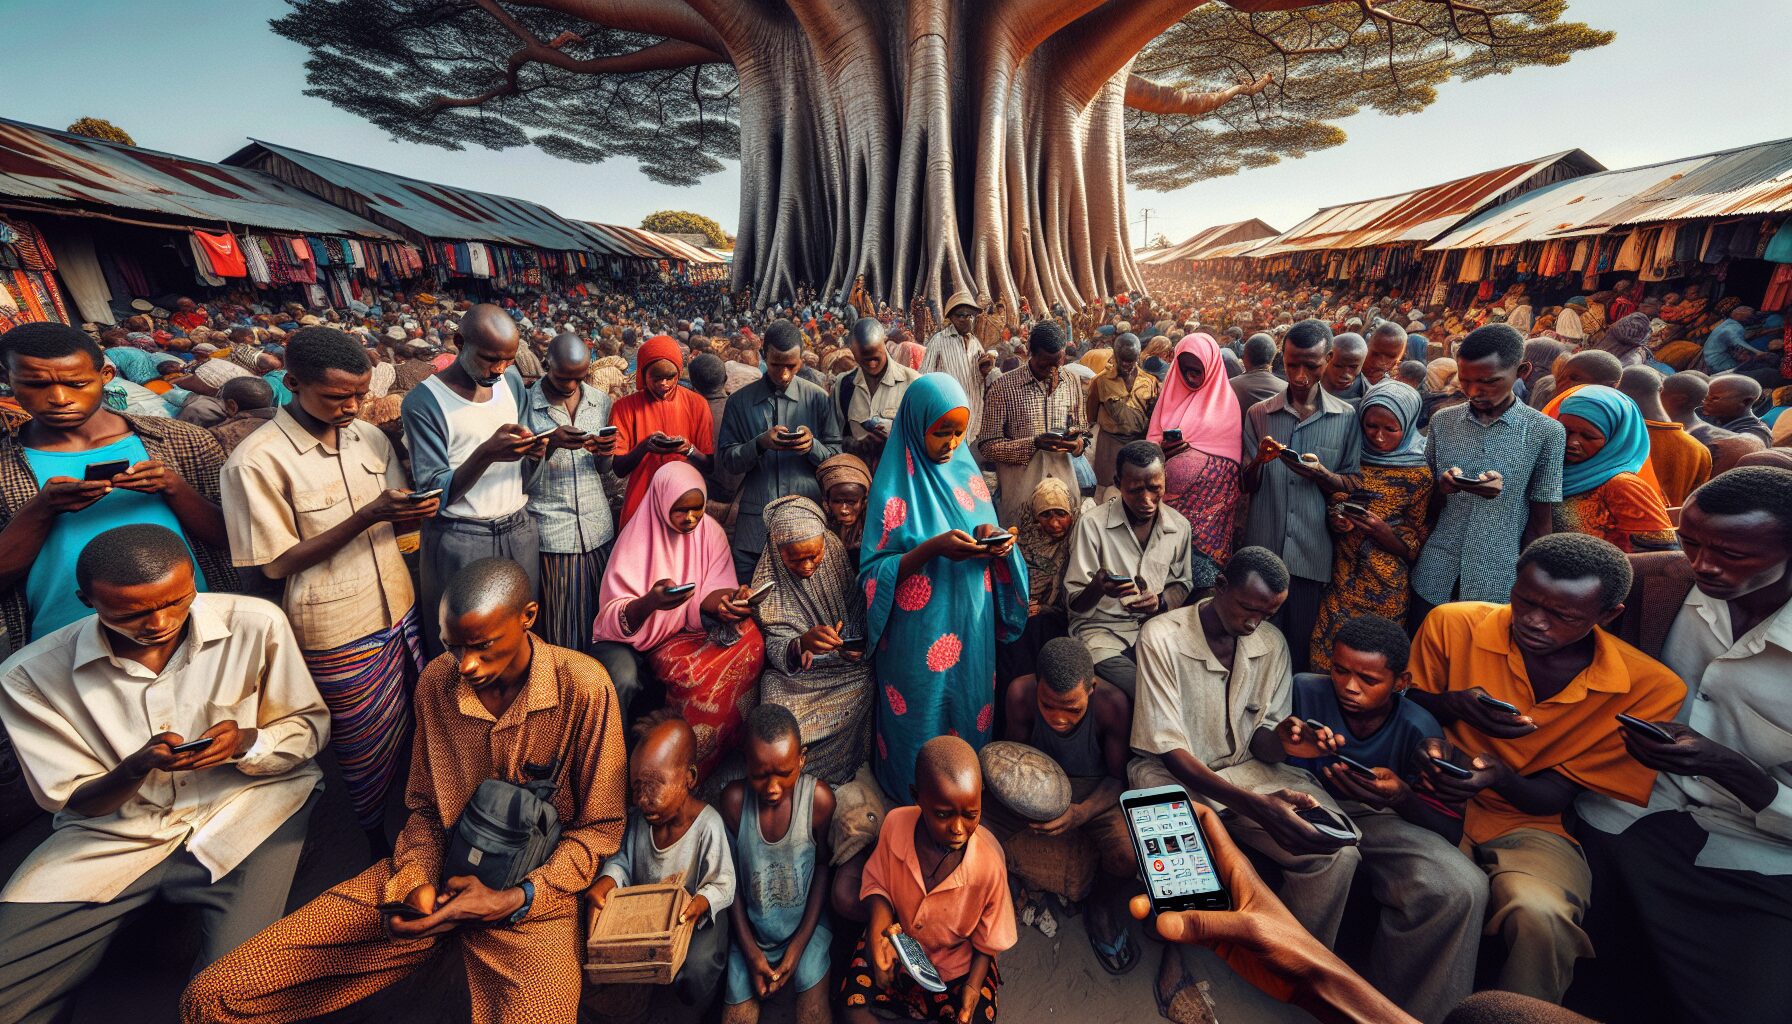 A group of people in Tanzania using mobile phones for communication and digital transactions